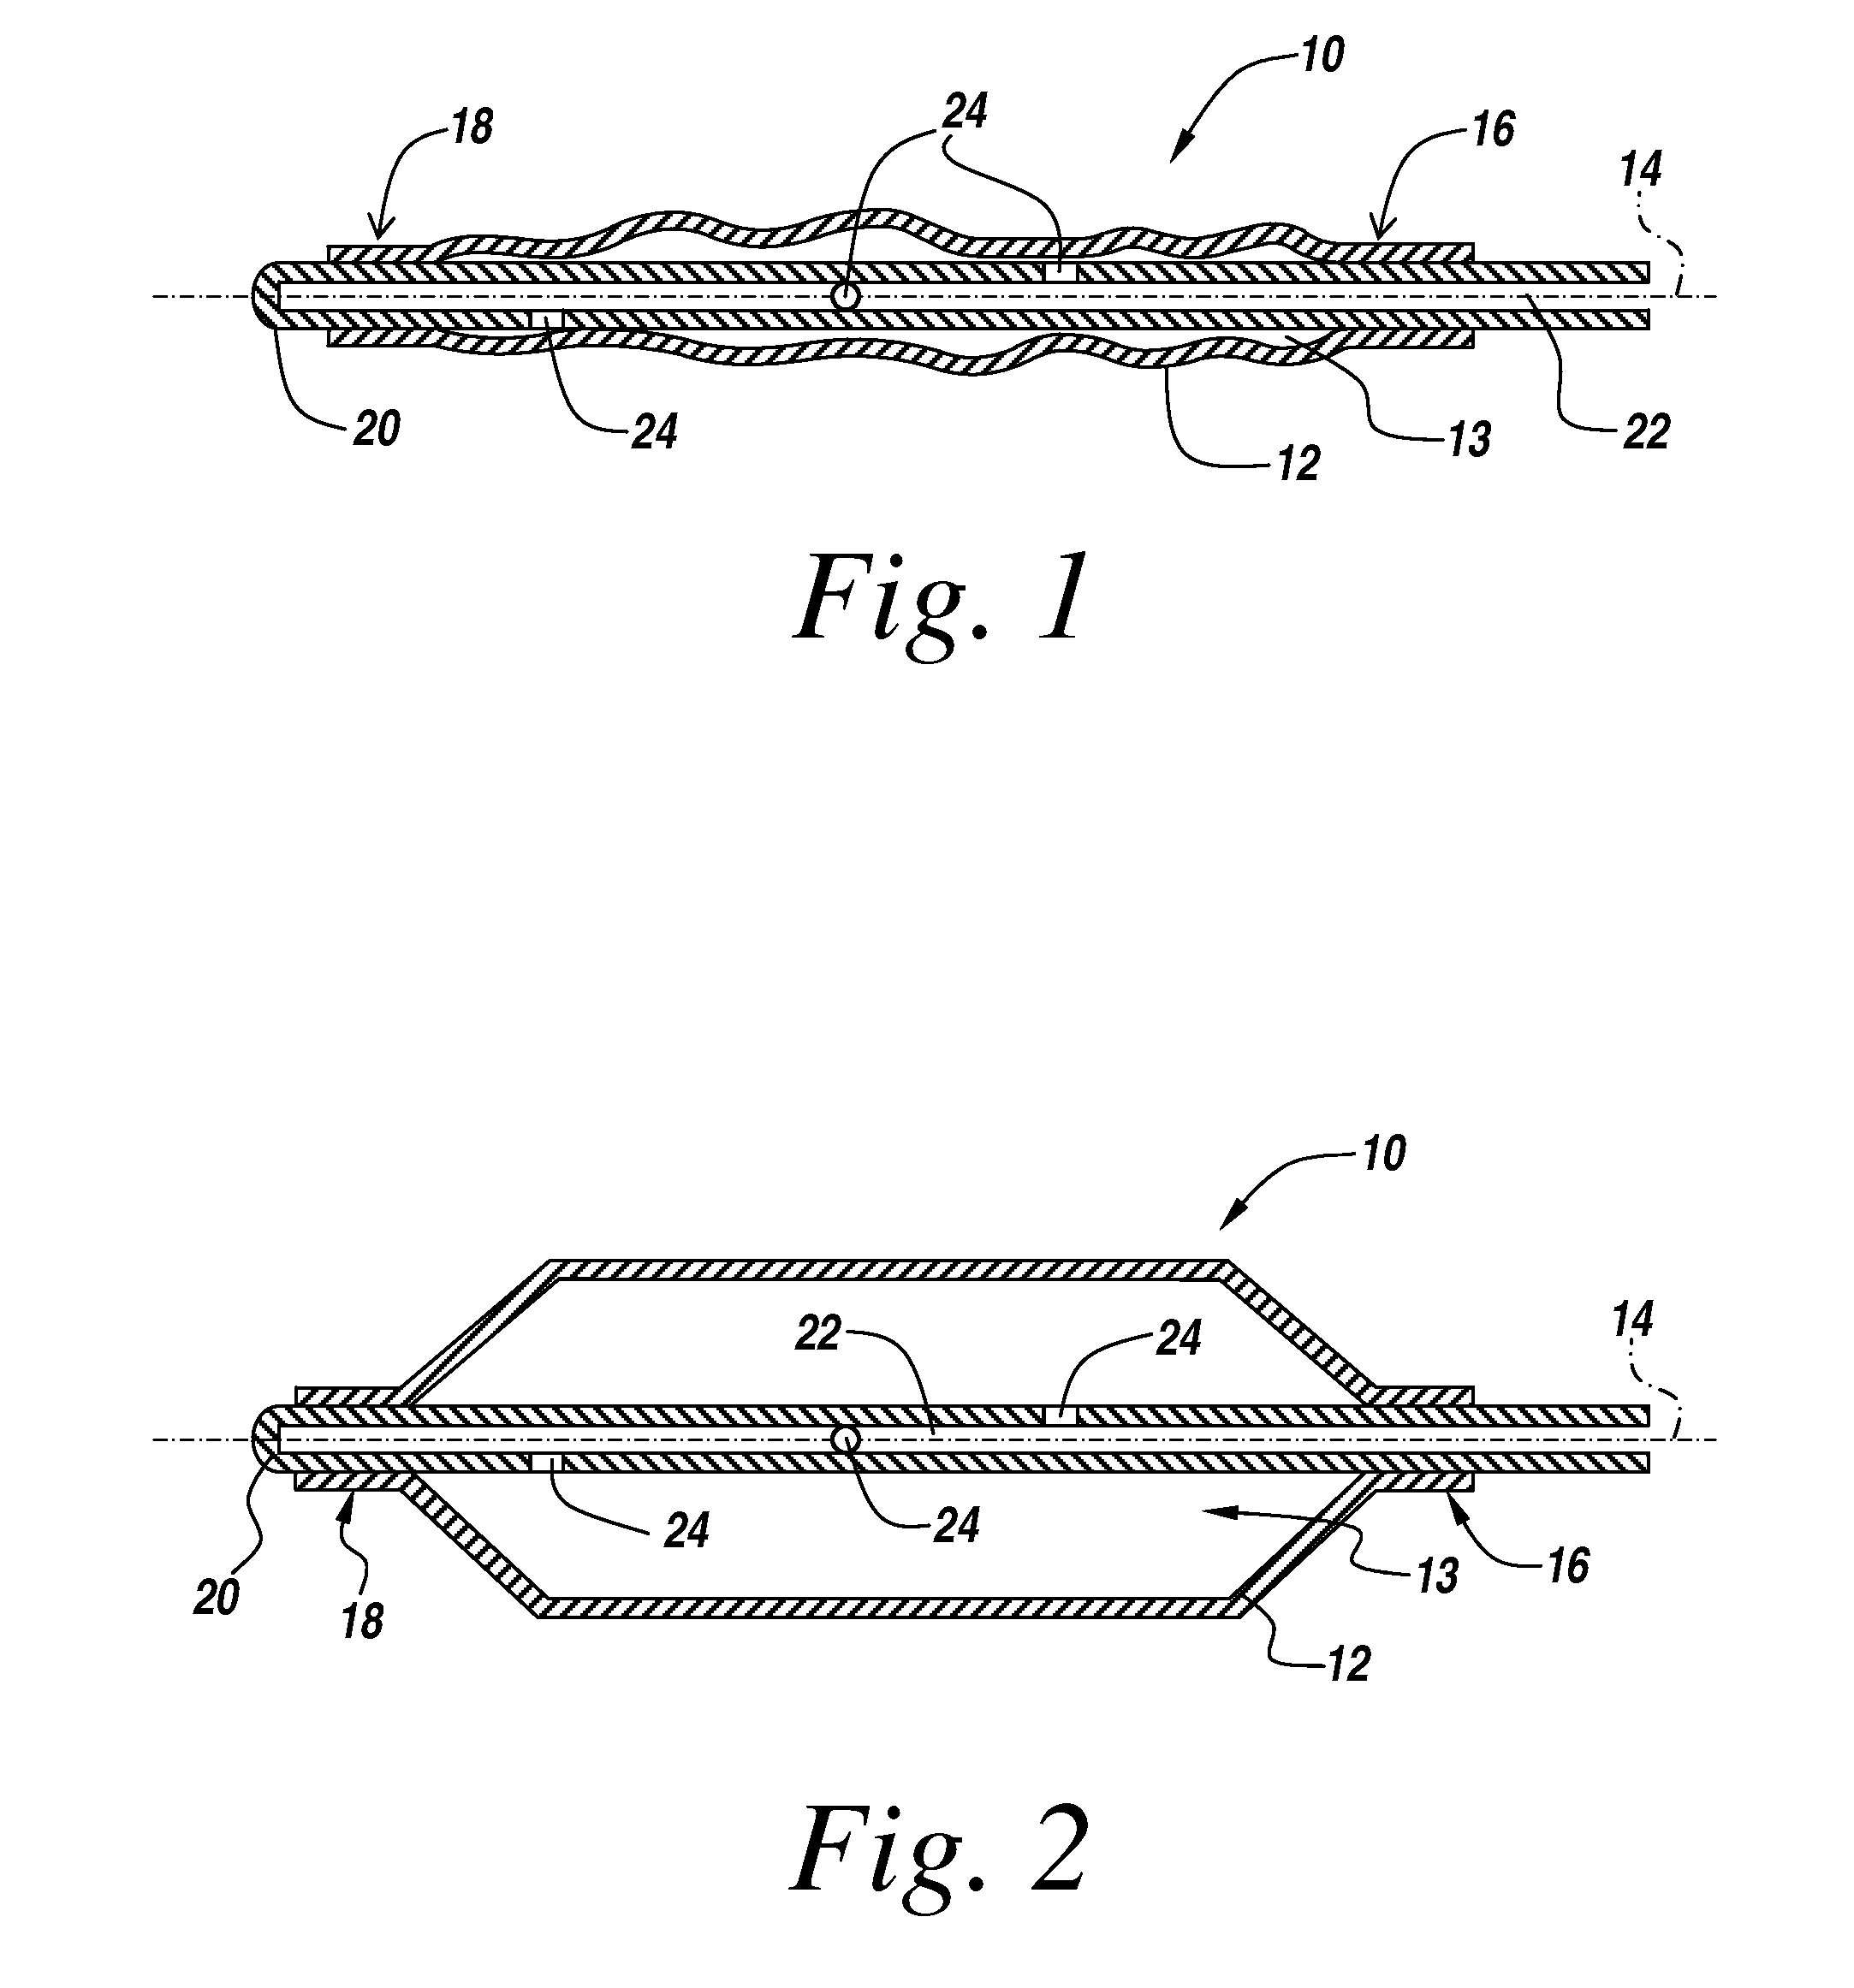 Application of a therapeutic substance to a tissue location using an expandable medical device